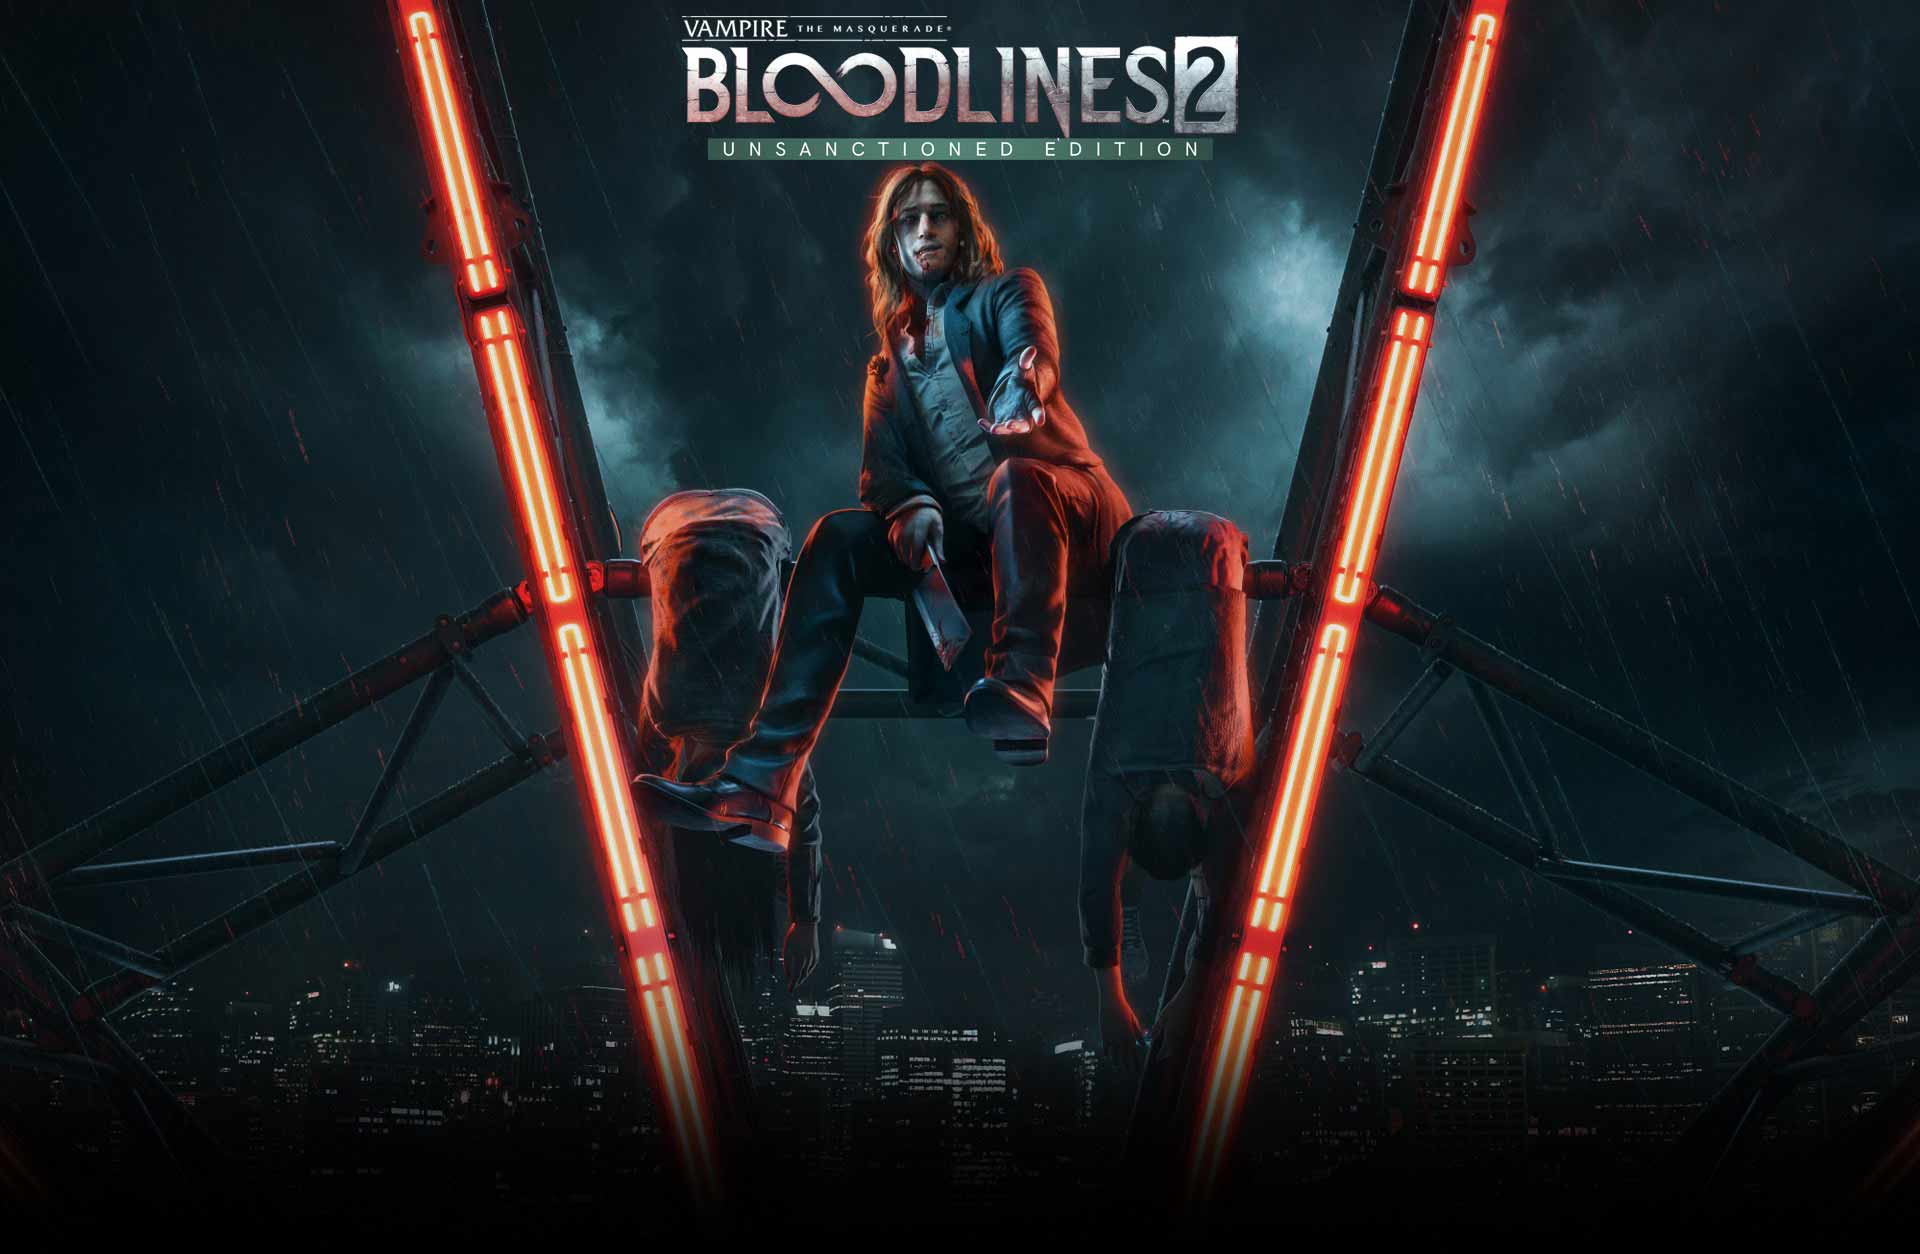 Vampire The Masquerade - Bloodlines 2 Unsanctioned Edition